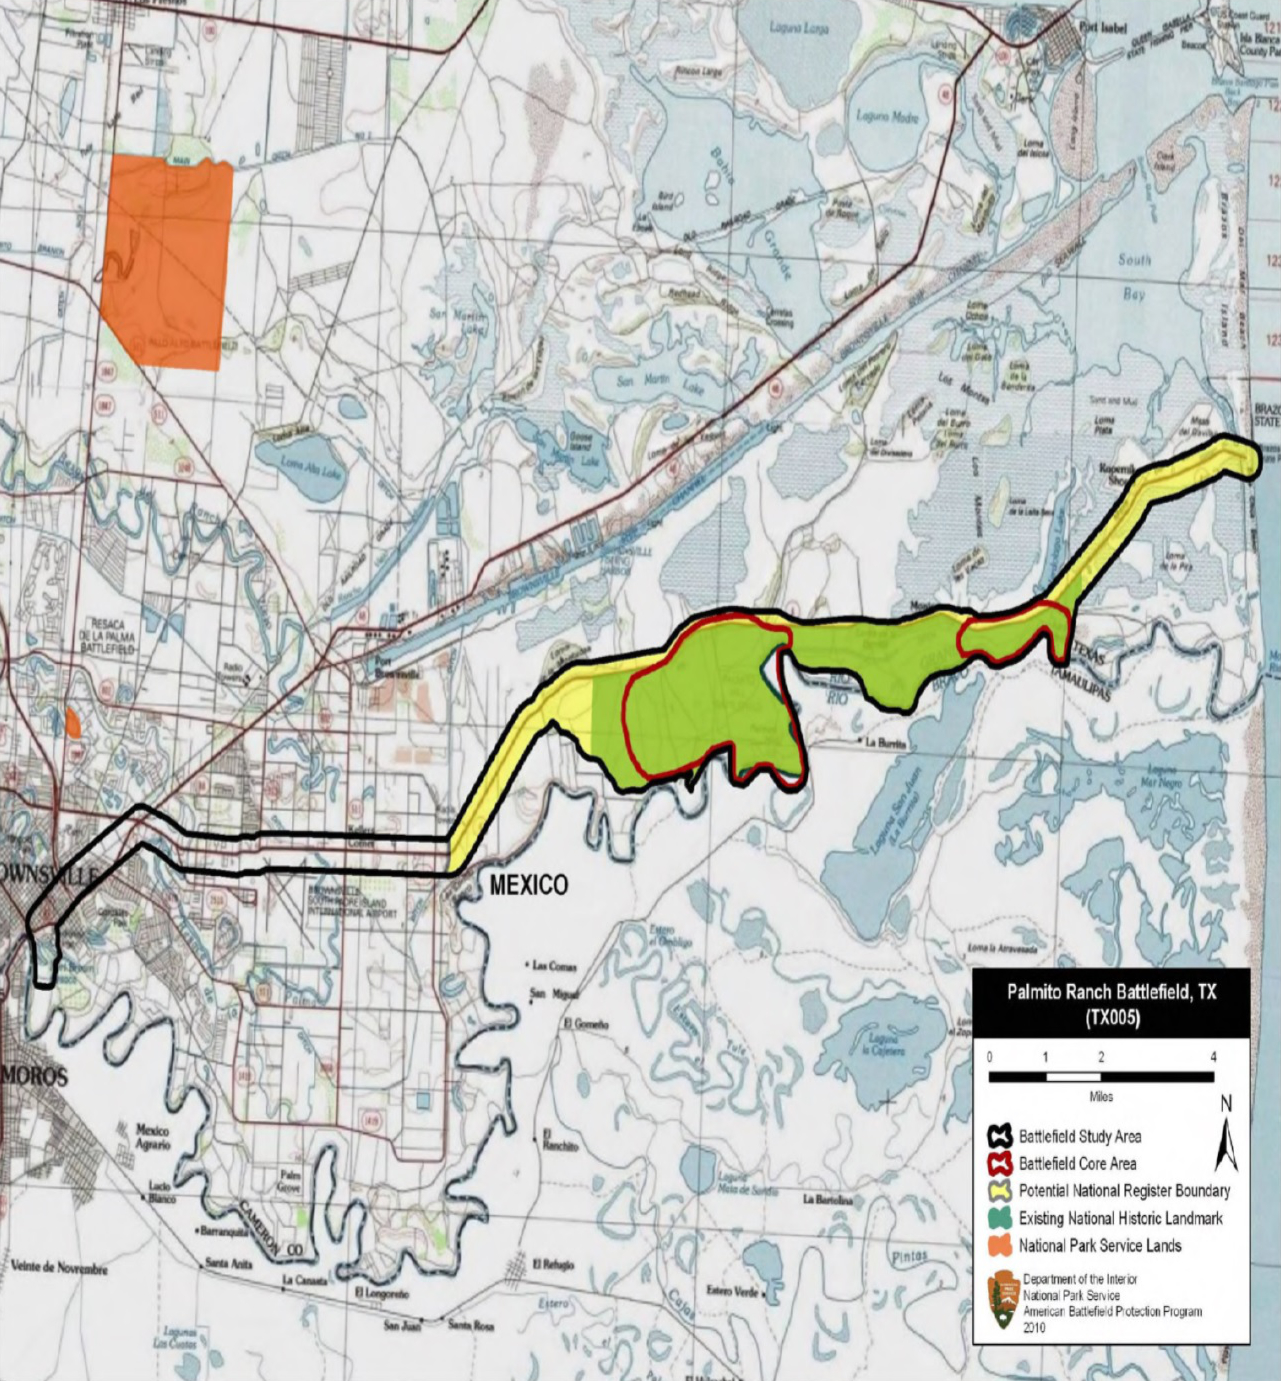 Map of Palmito Ranch Battlefield core and study areas, 2010. Source: American Battlefield Protection Program, National Park Service.